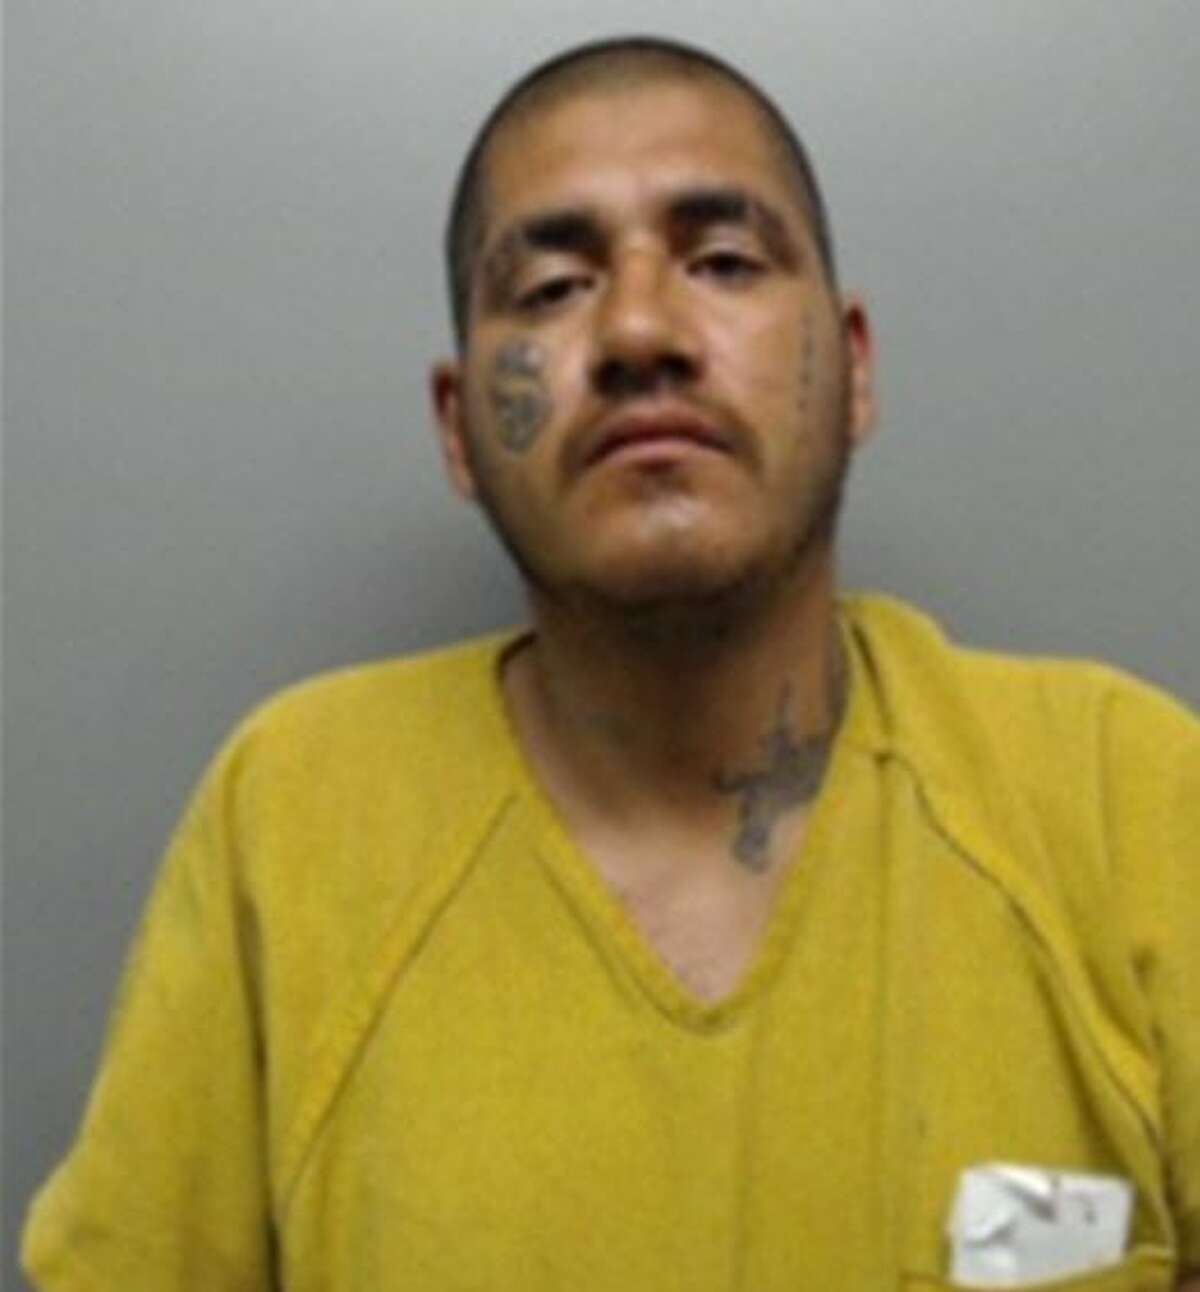 Rafael Juarez, 33, was charged with robbery.